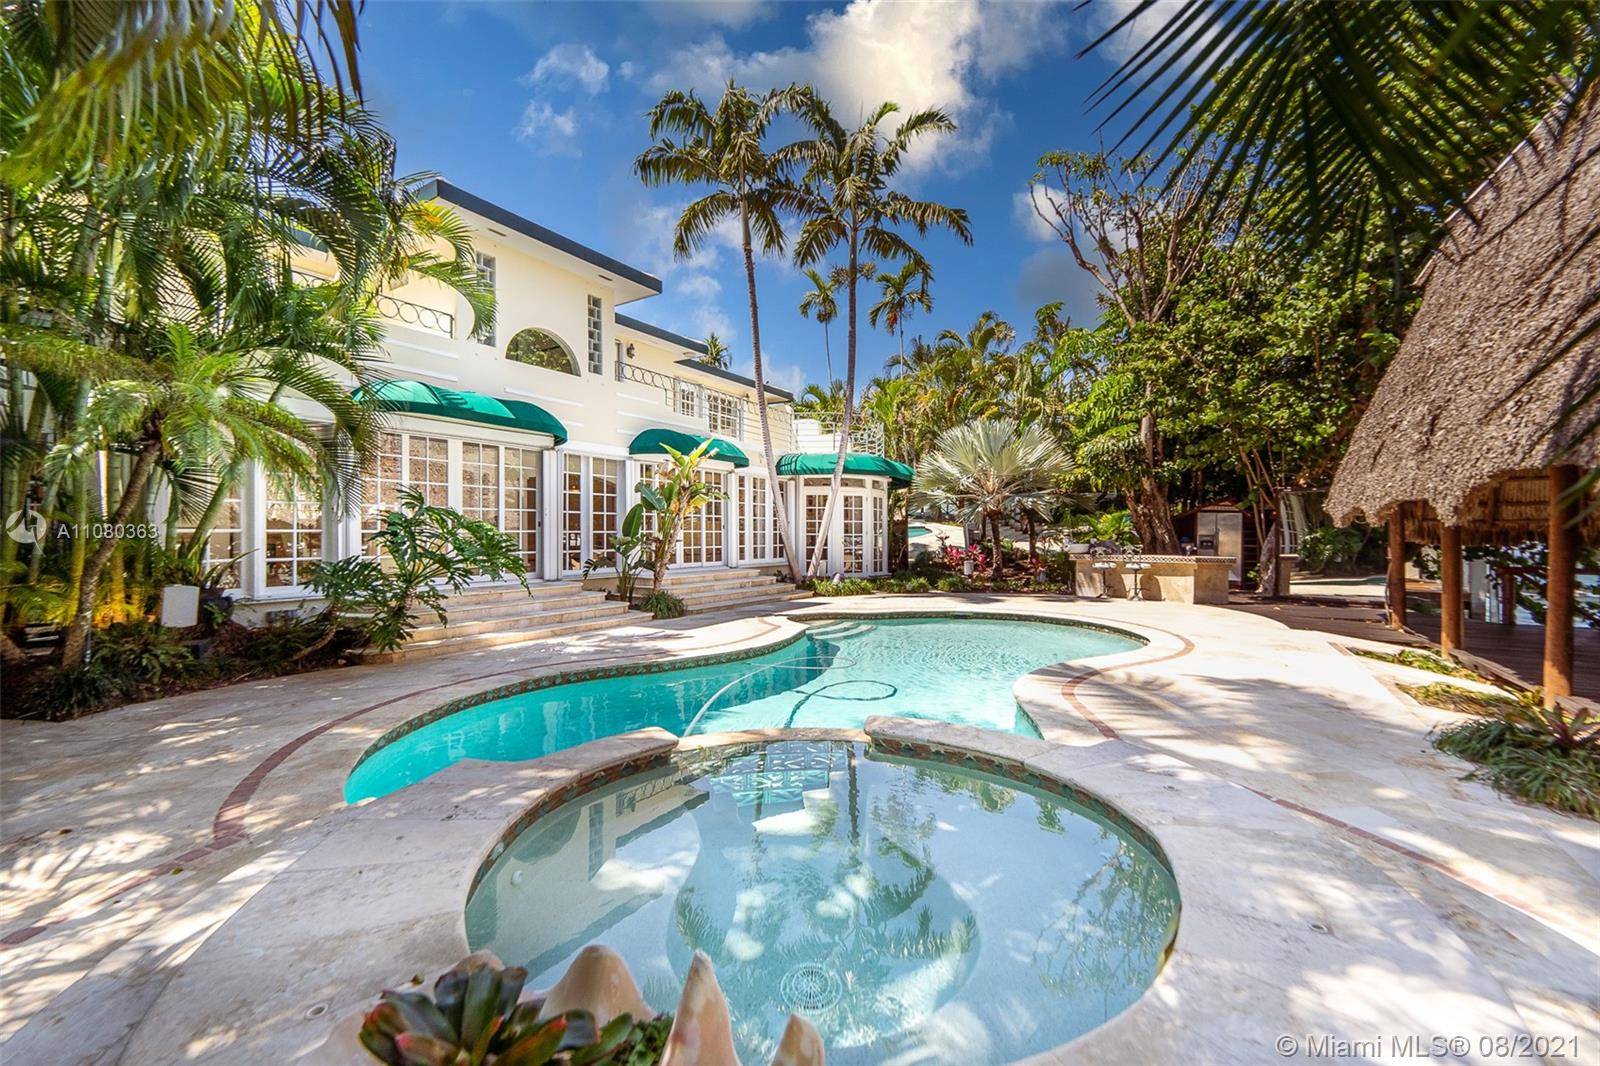 Live out your Miami dream at this waterfront property.